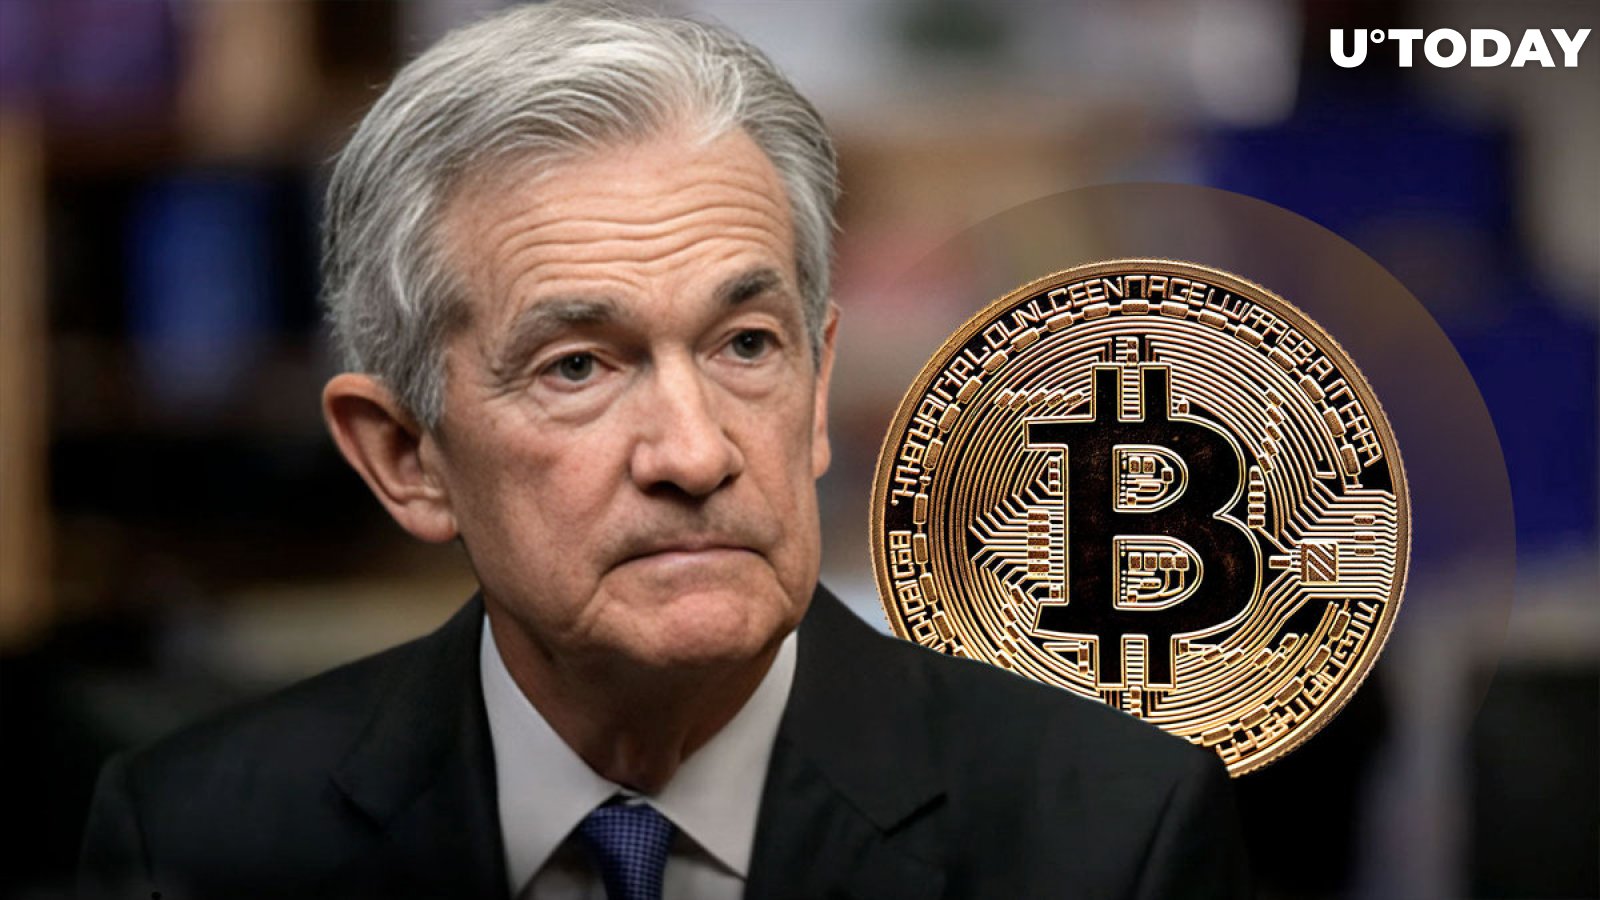 Buy Bitcoin Signal Emerges as Jerome Powell Delivers Strong Economic Outlook